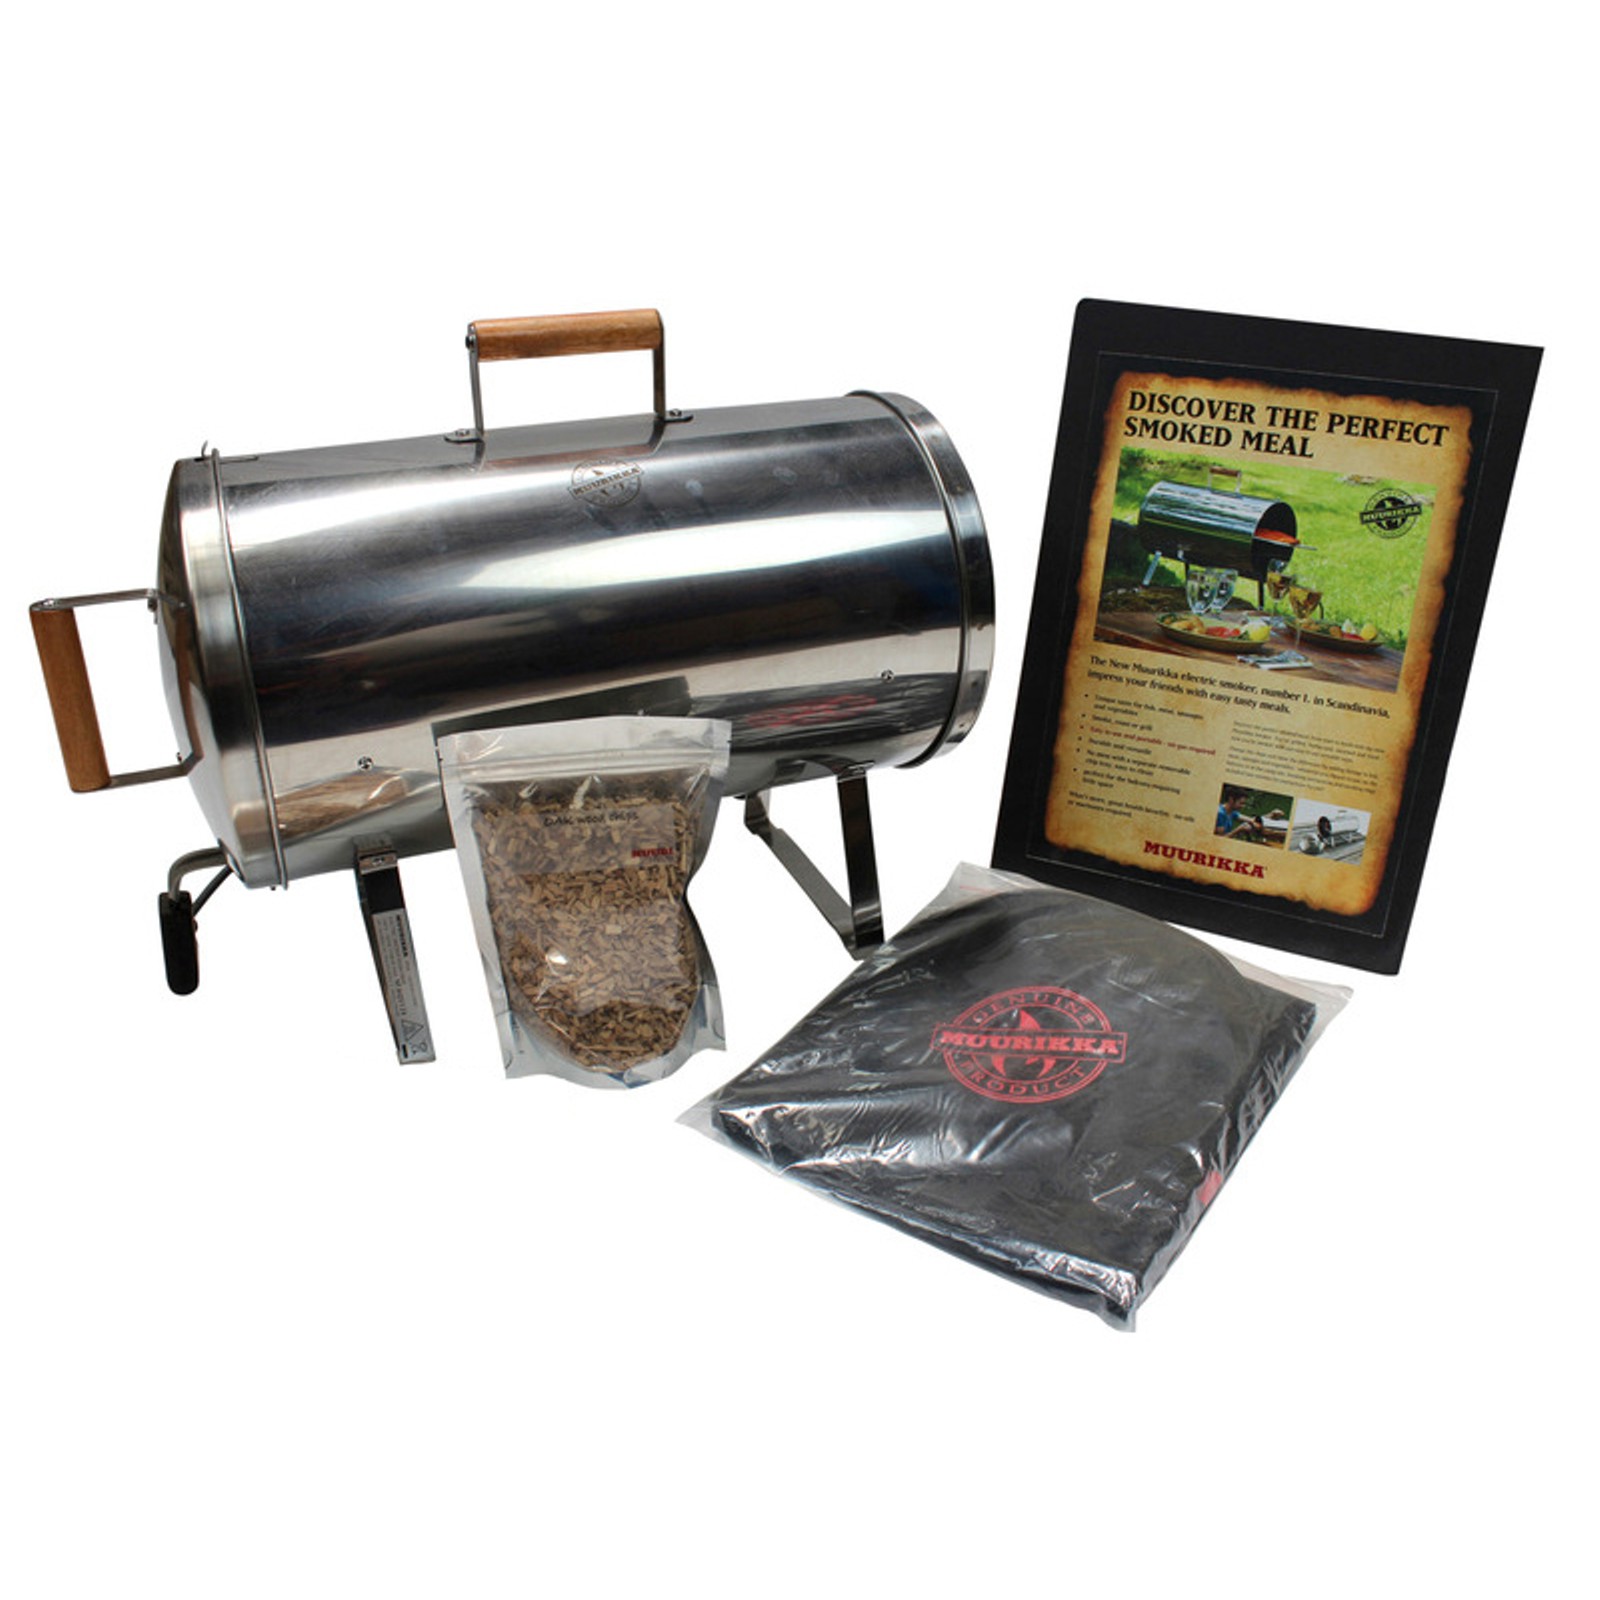 Stainless Steel Electric Portable Smoker, Roaster and Grill | eBay